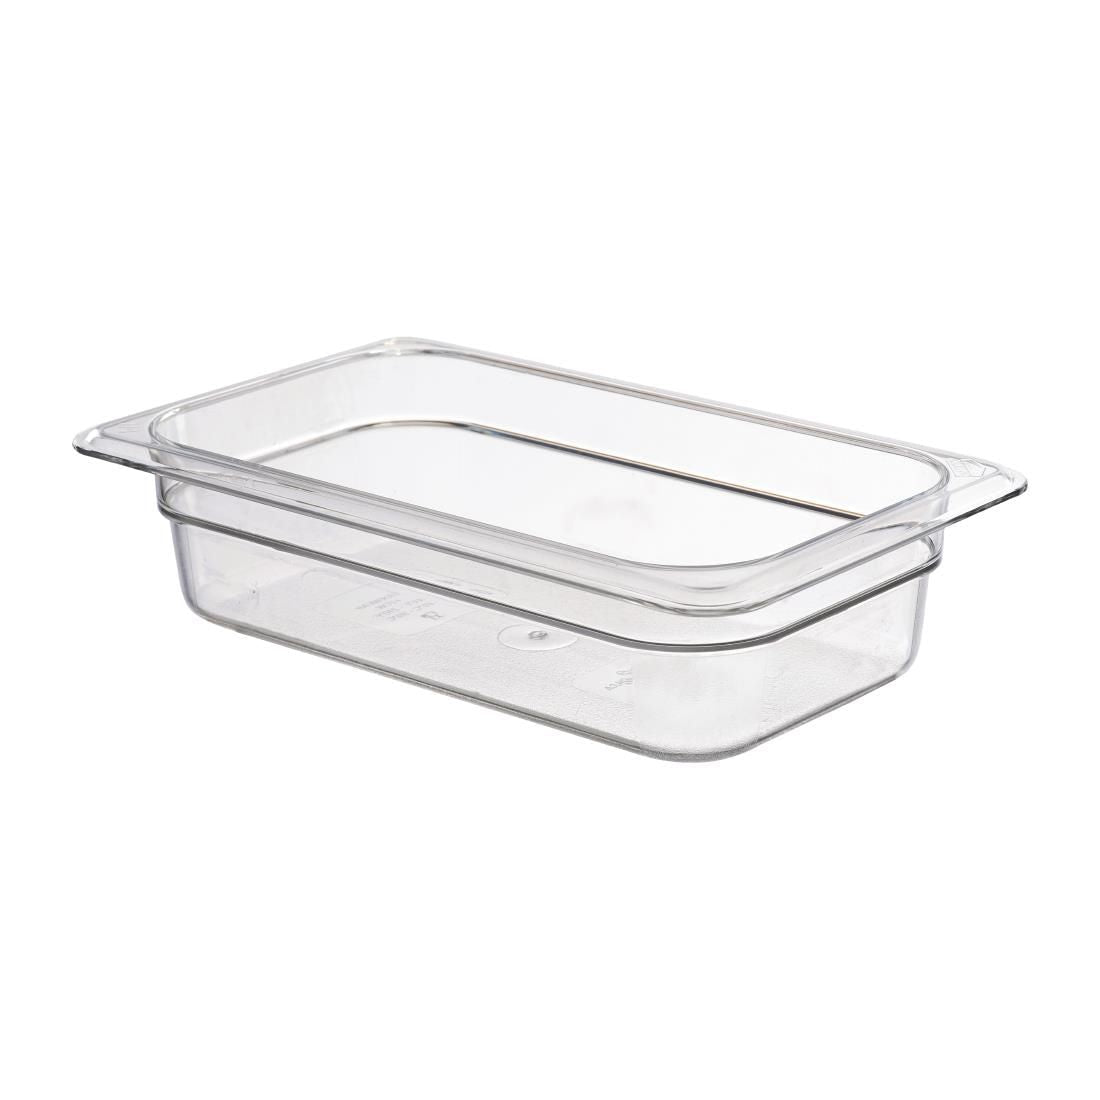 DM748 Cambro Polycarbonate 1/4 Gastronorm Pan 65mm JD Catering Equipment Solutions Ltd